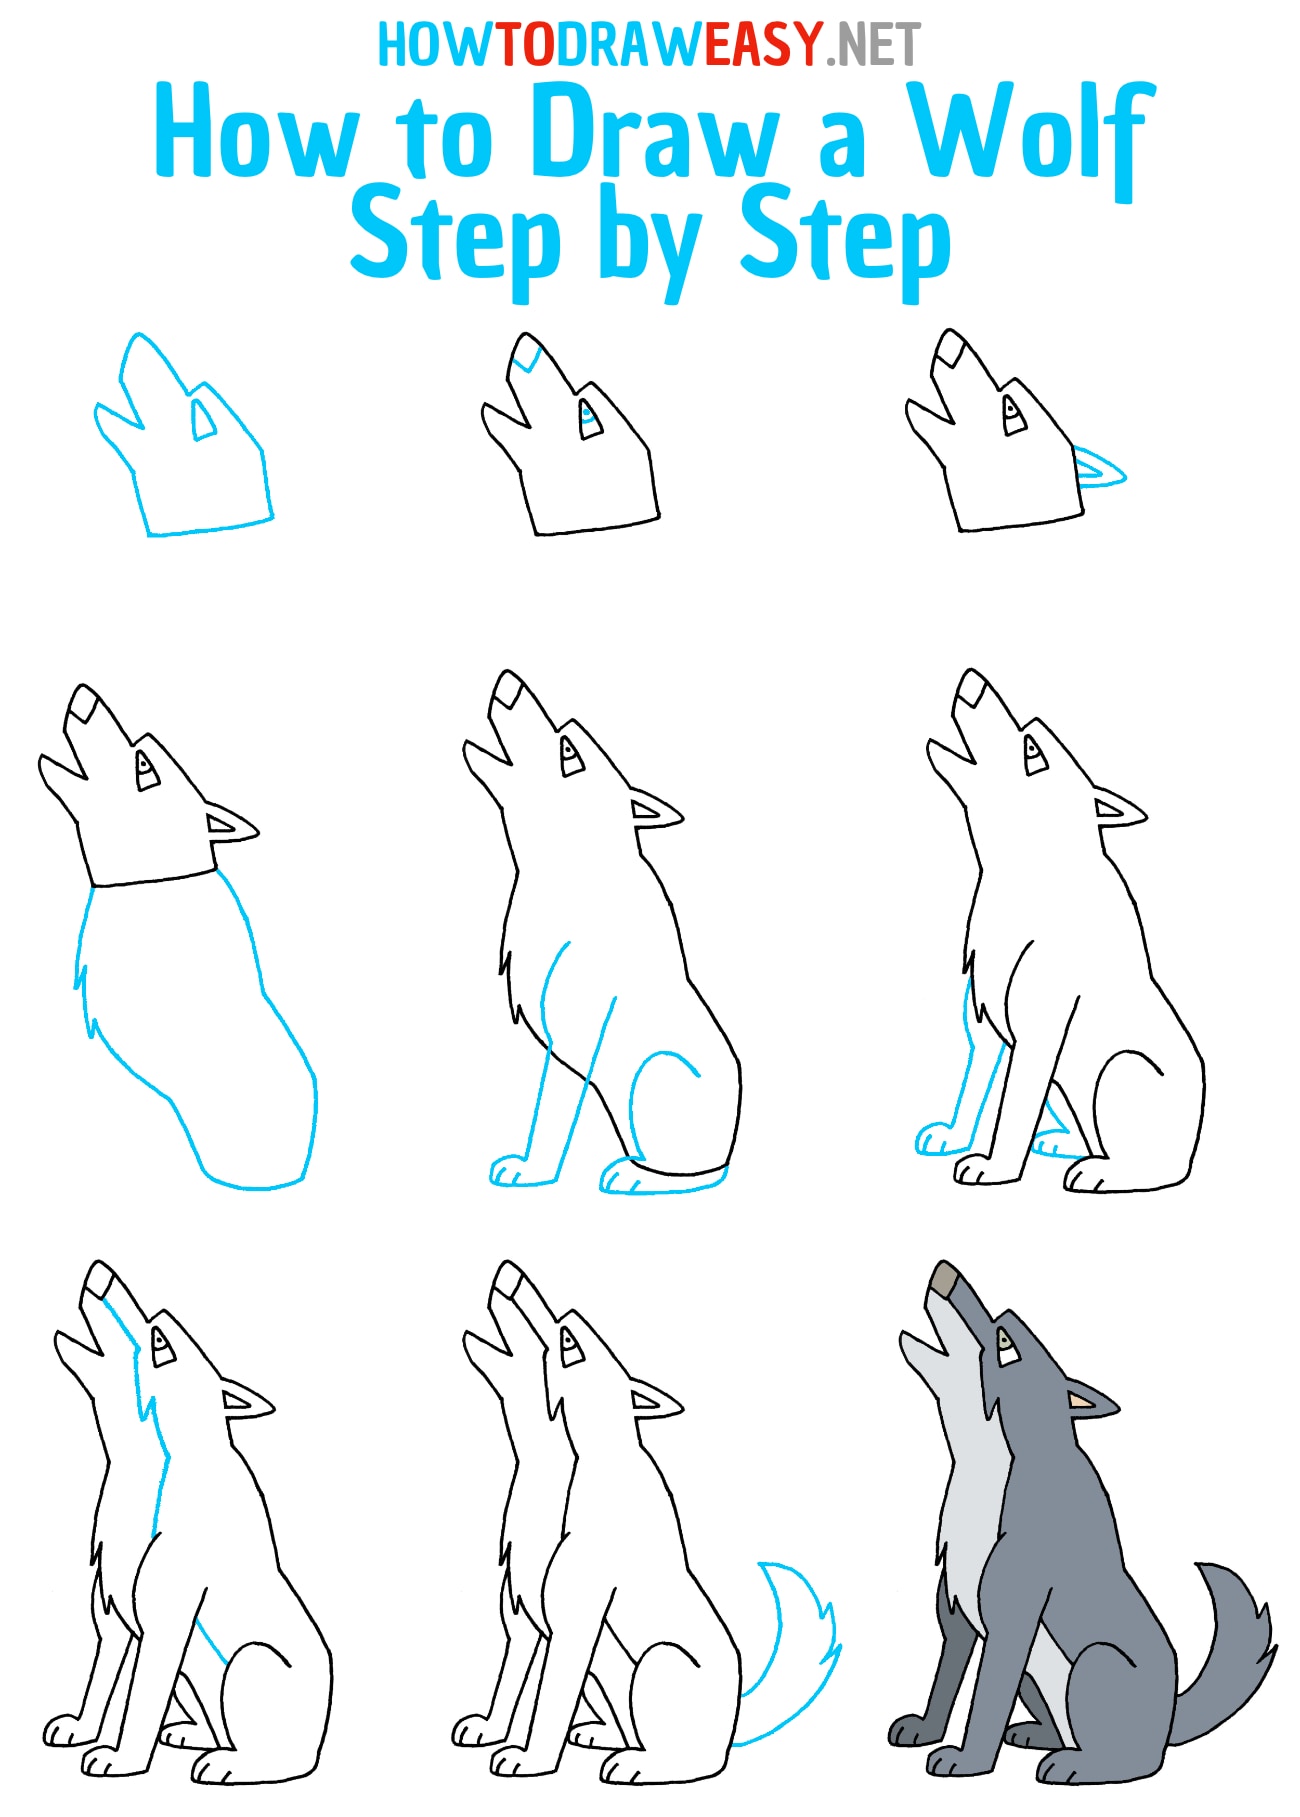 How to Draw a Wolf Easy Step by Step